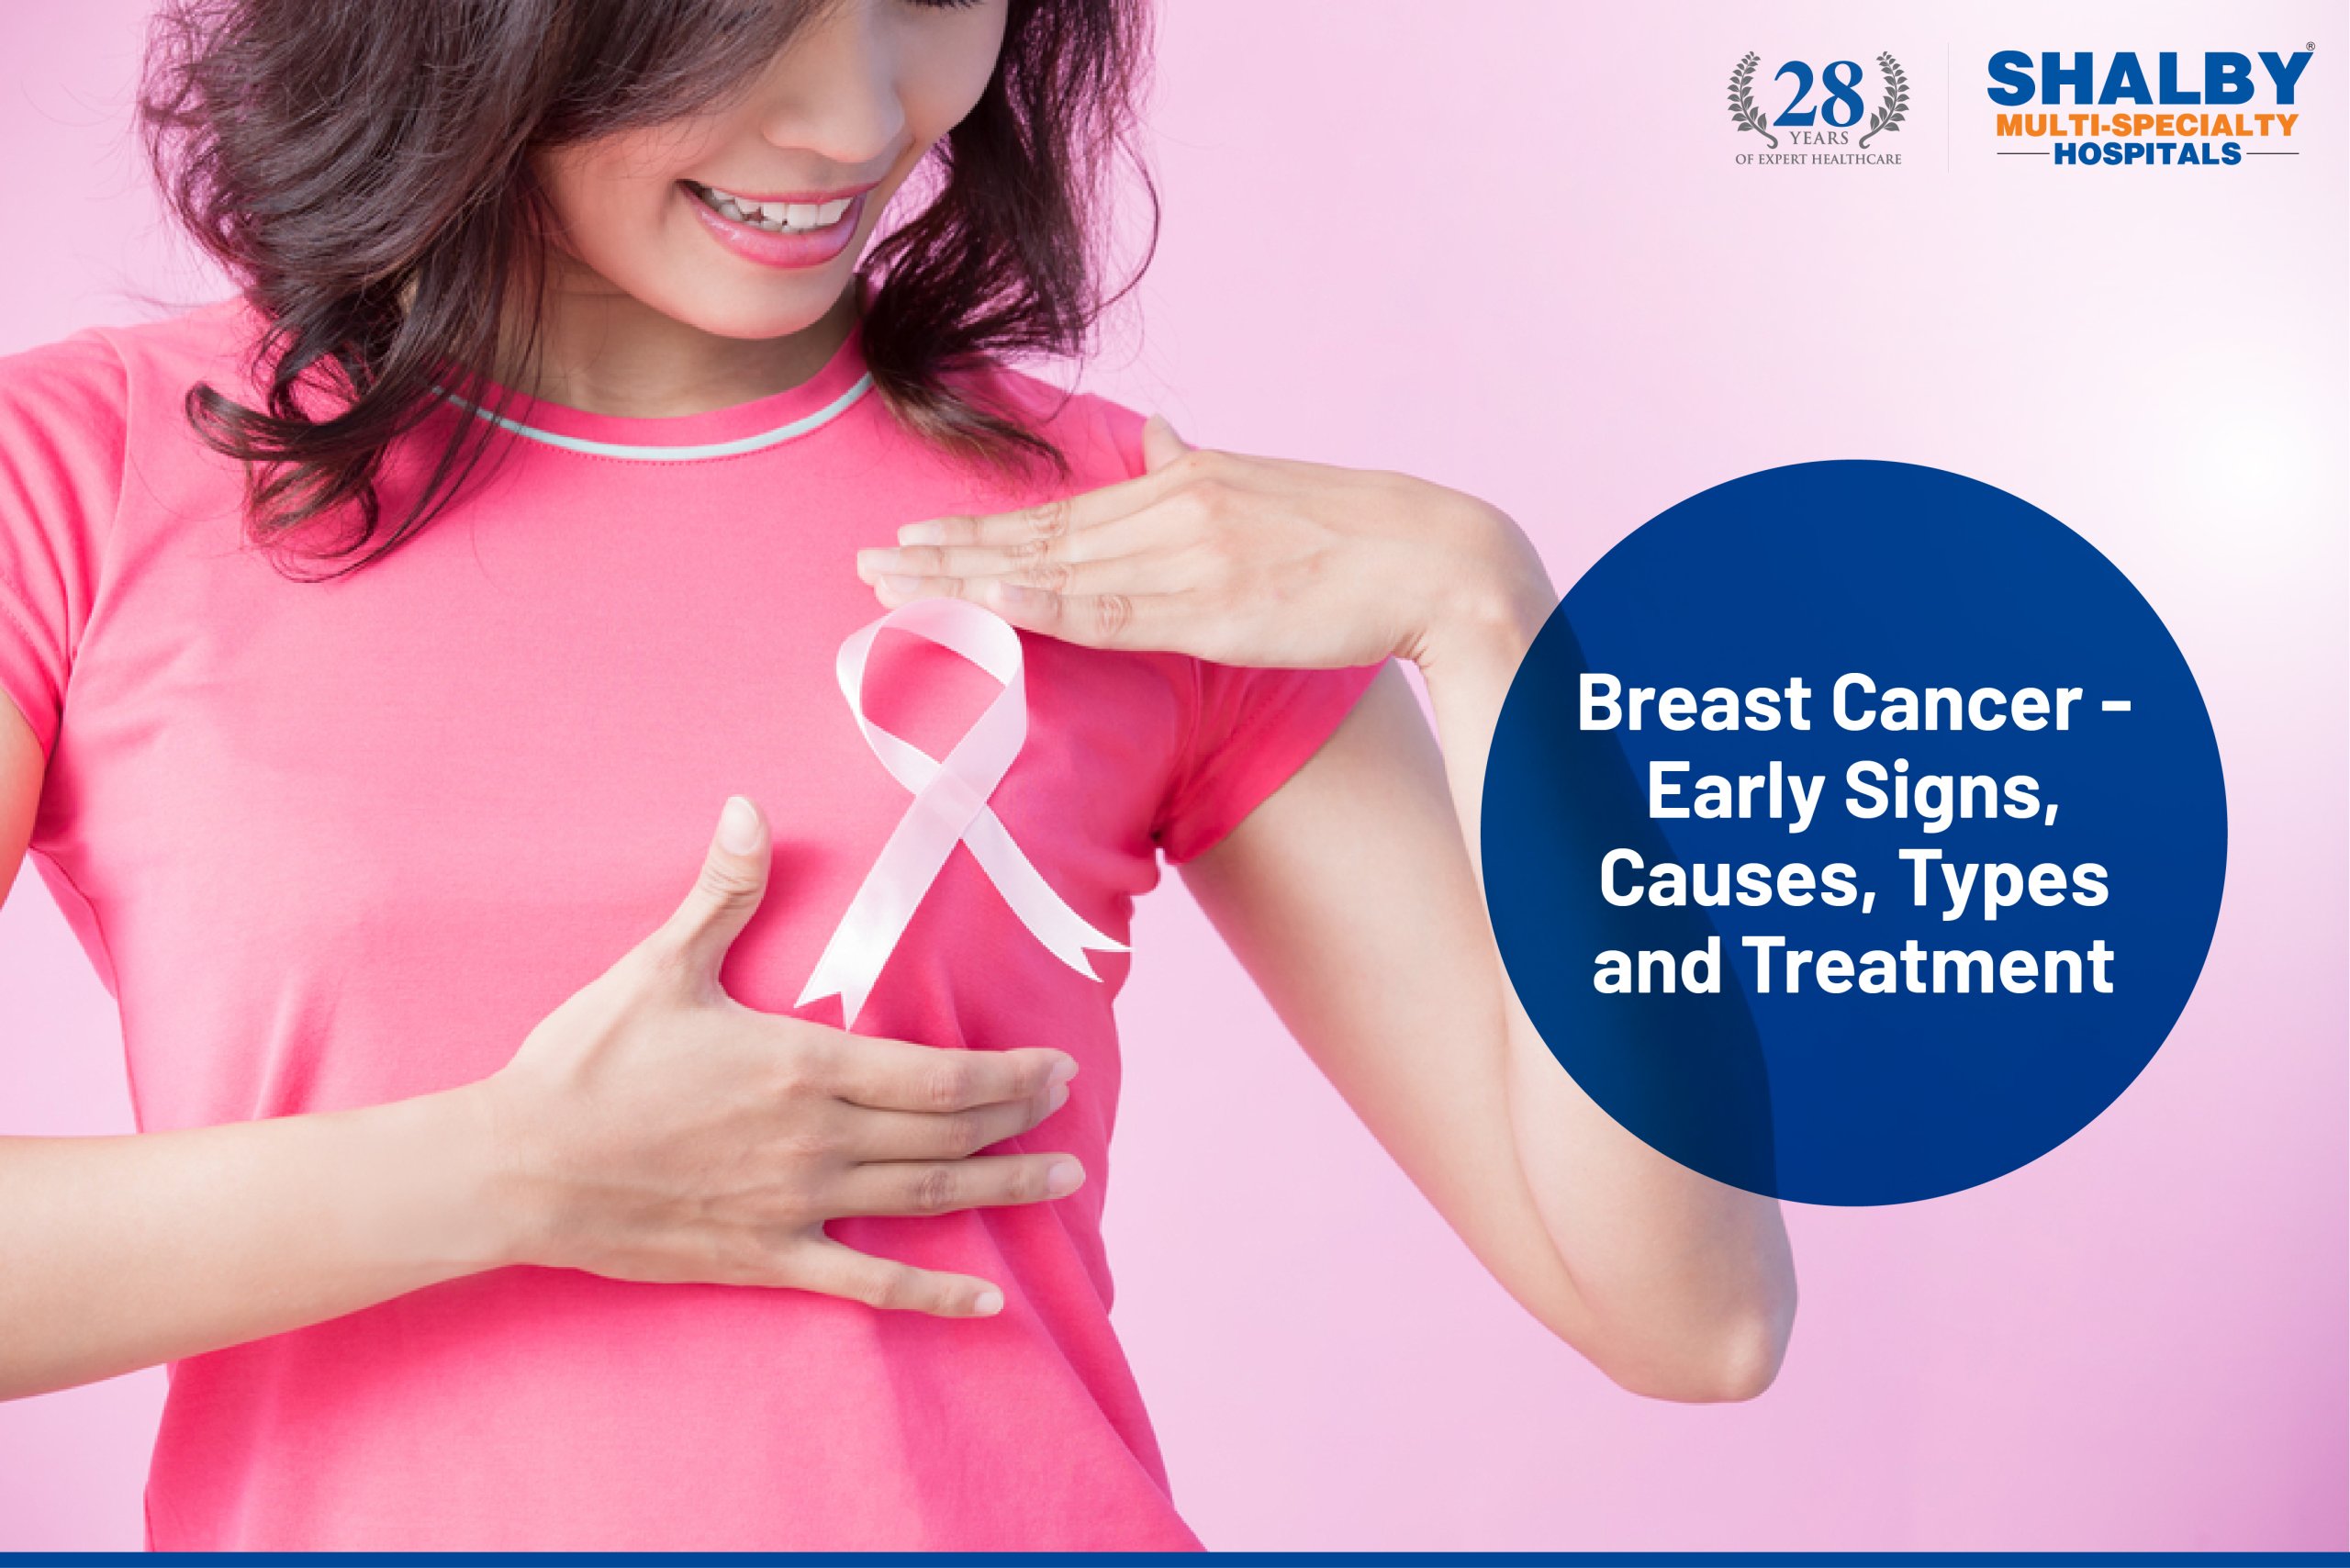 What Are the Signs and Symptoms of Breast Cancer?